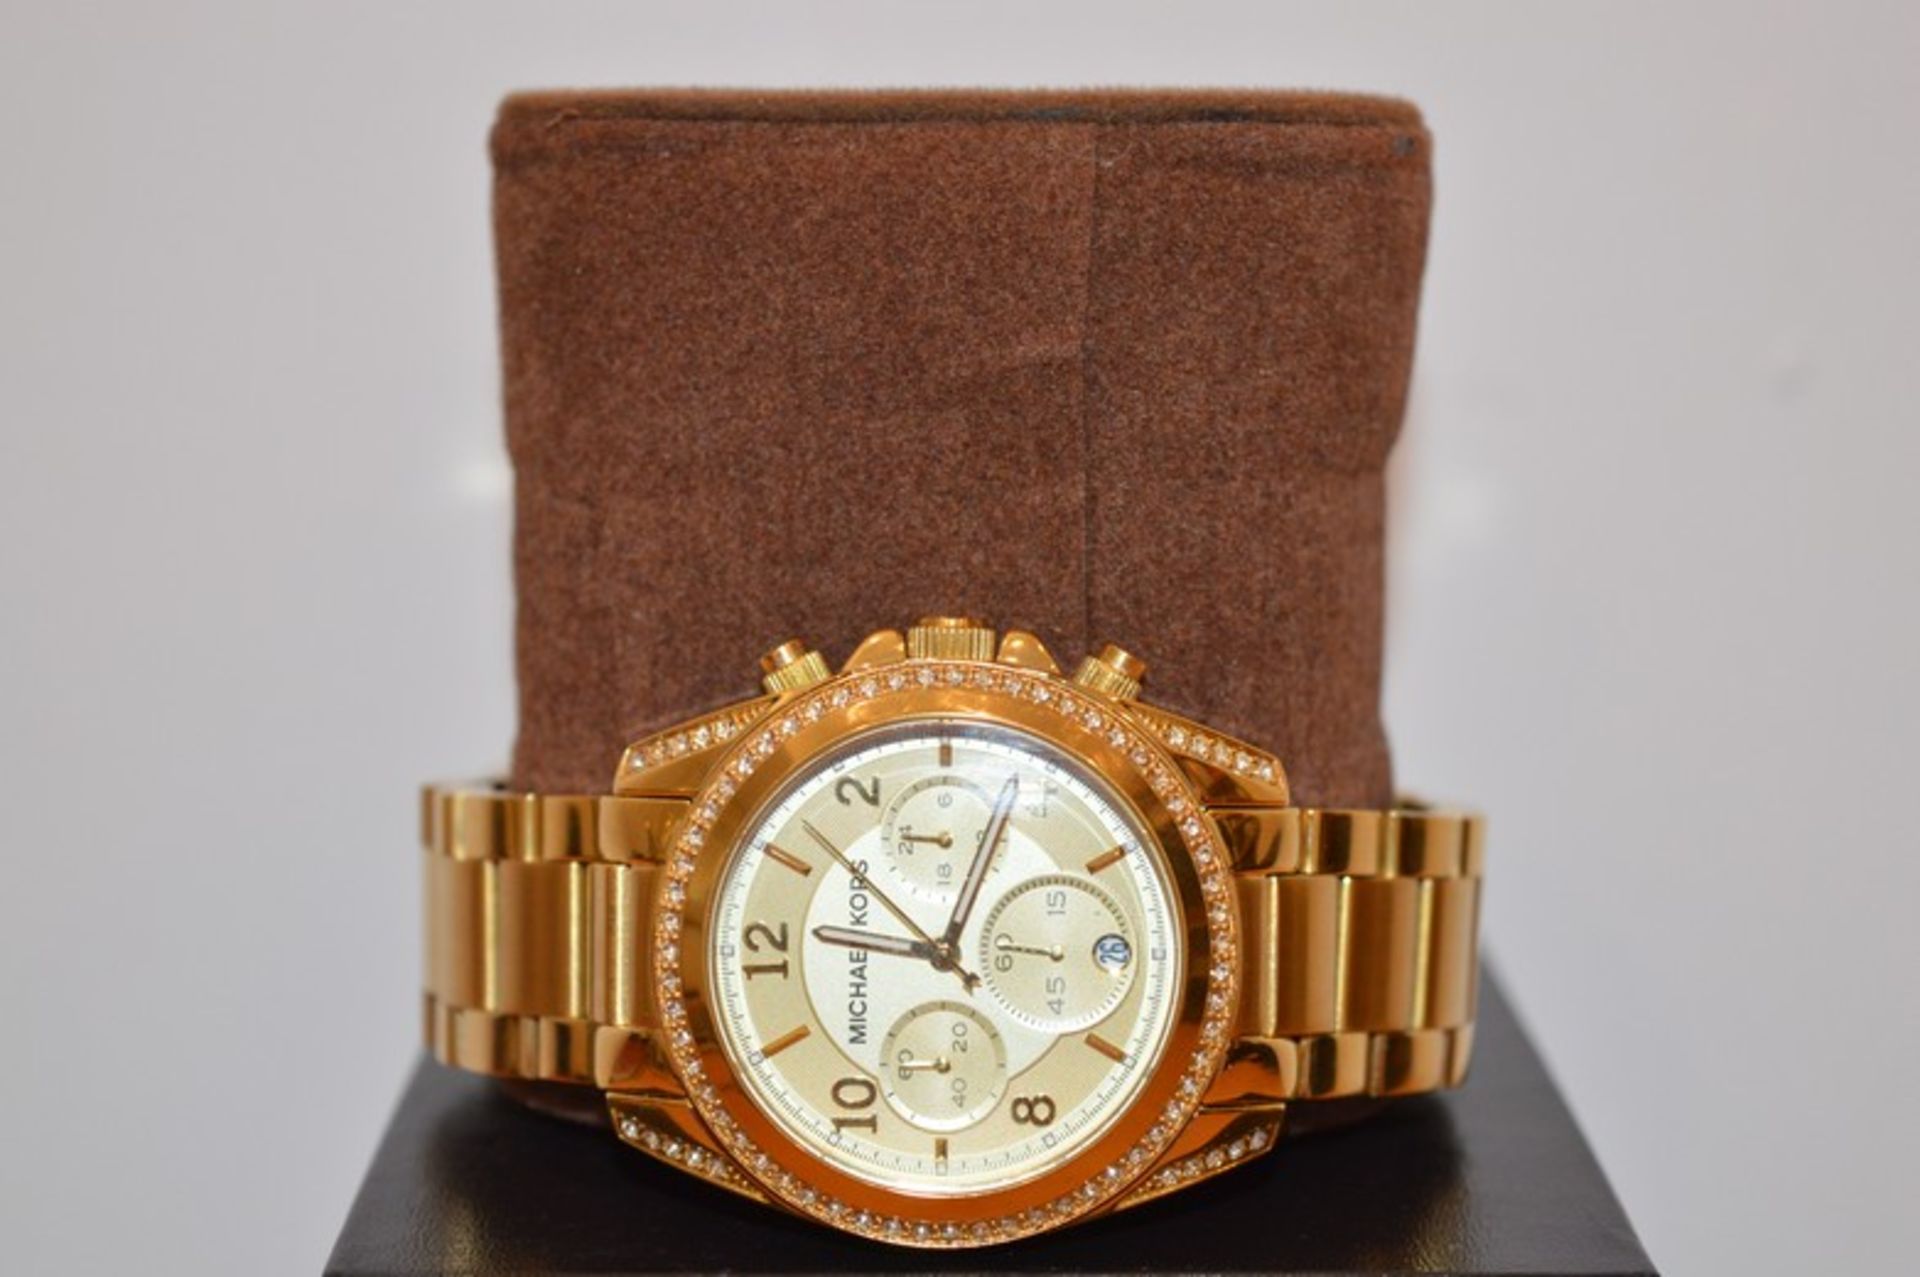 BOXED BRAND NEW MICHEAL KORS LADIES GOLD DESIGNER WRIST WATCH RRP £279.99 (MD-WATCH)